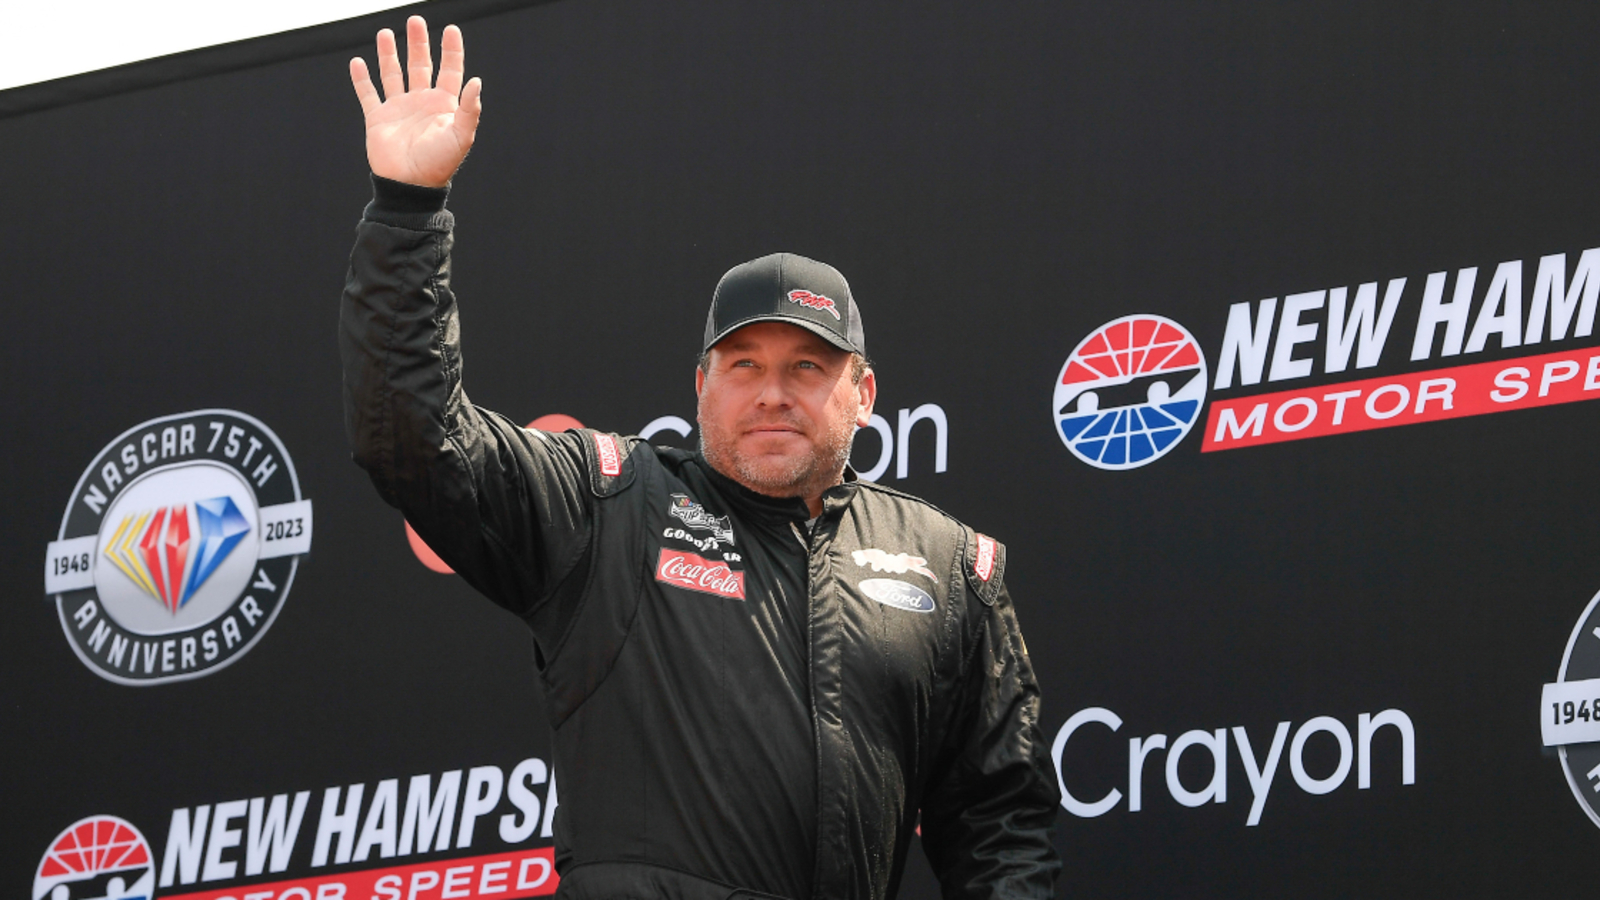 Ryan Newman claims SRX Series championship at Lucas Oil Speedway over Tony Stewart